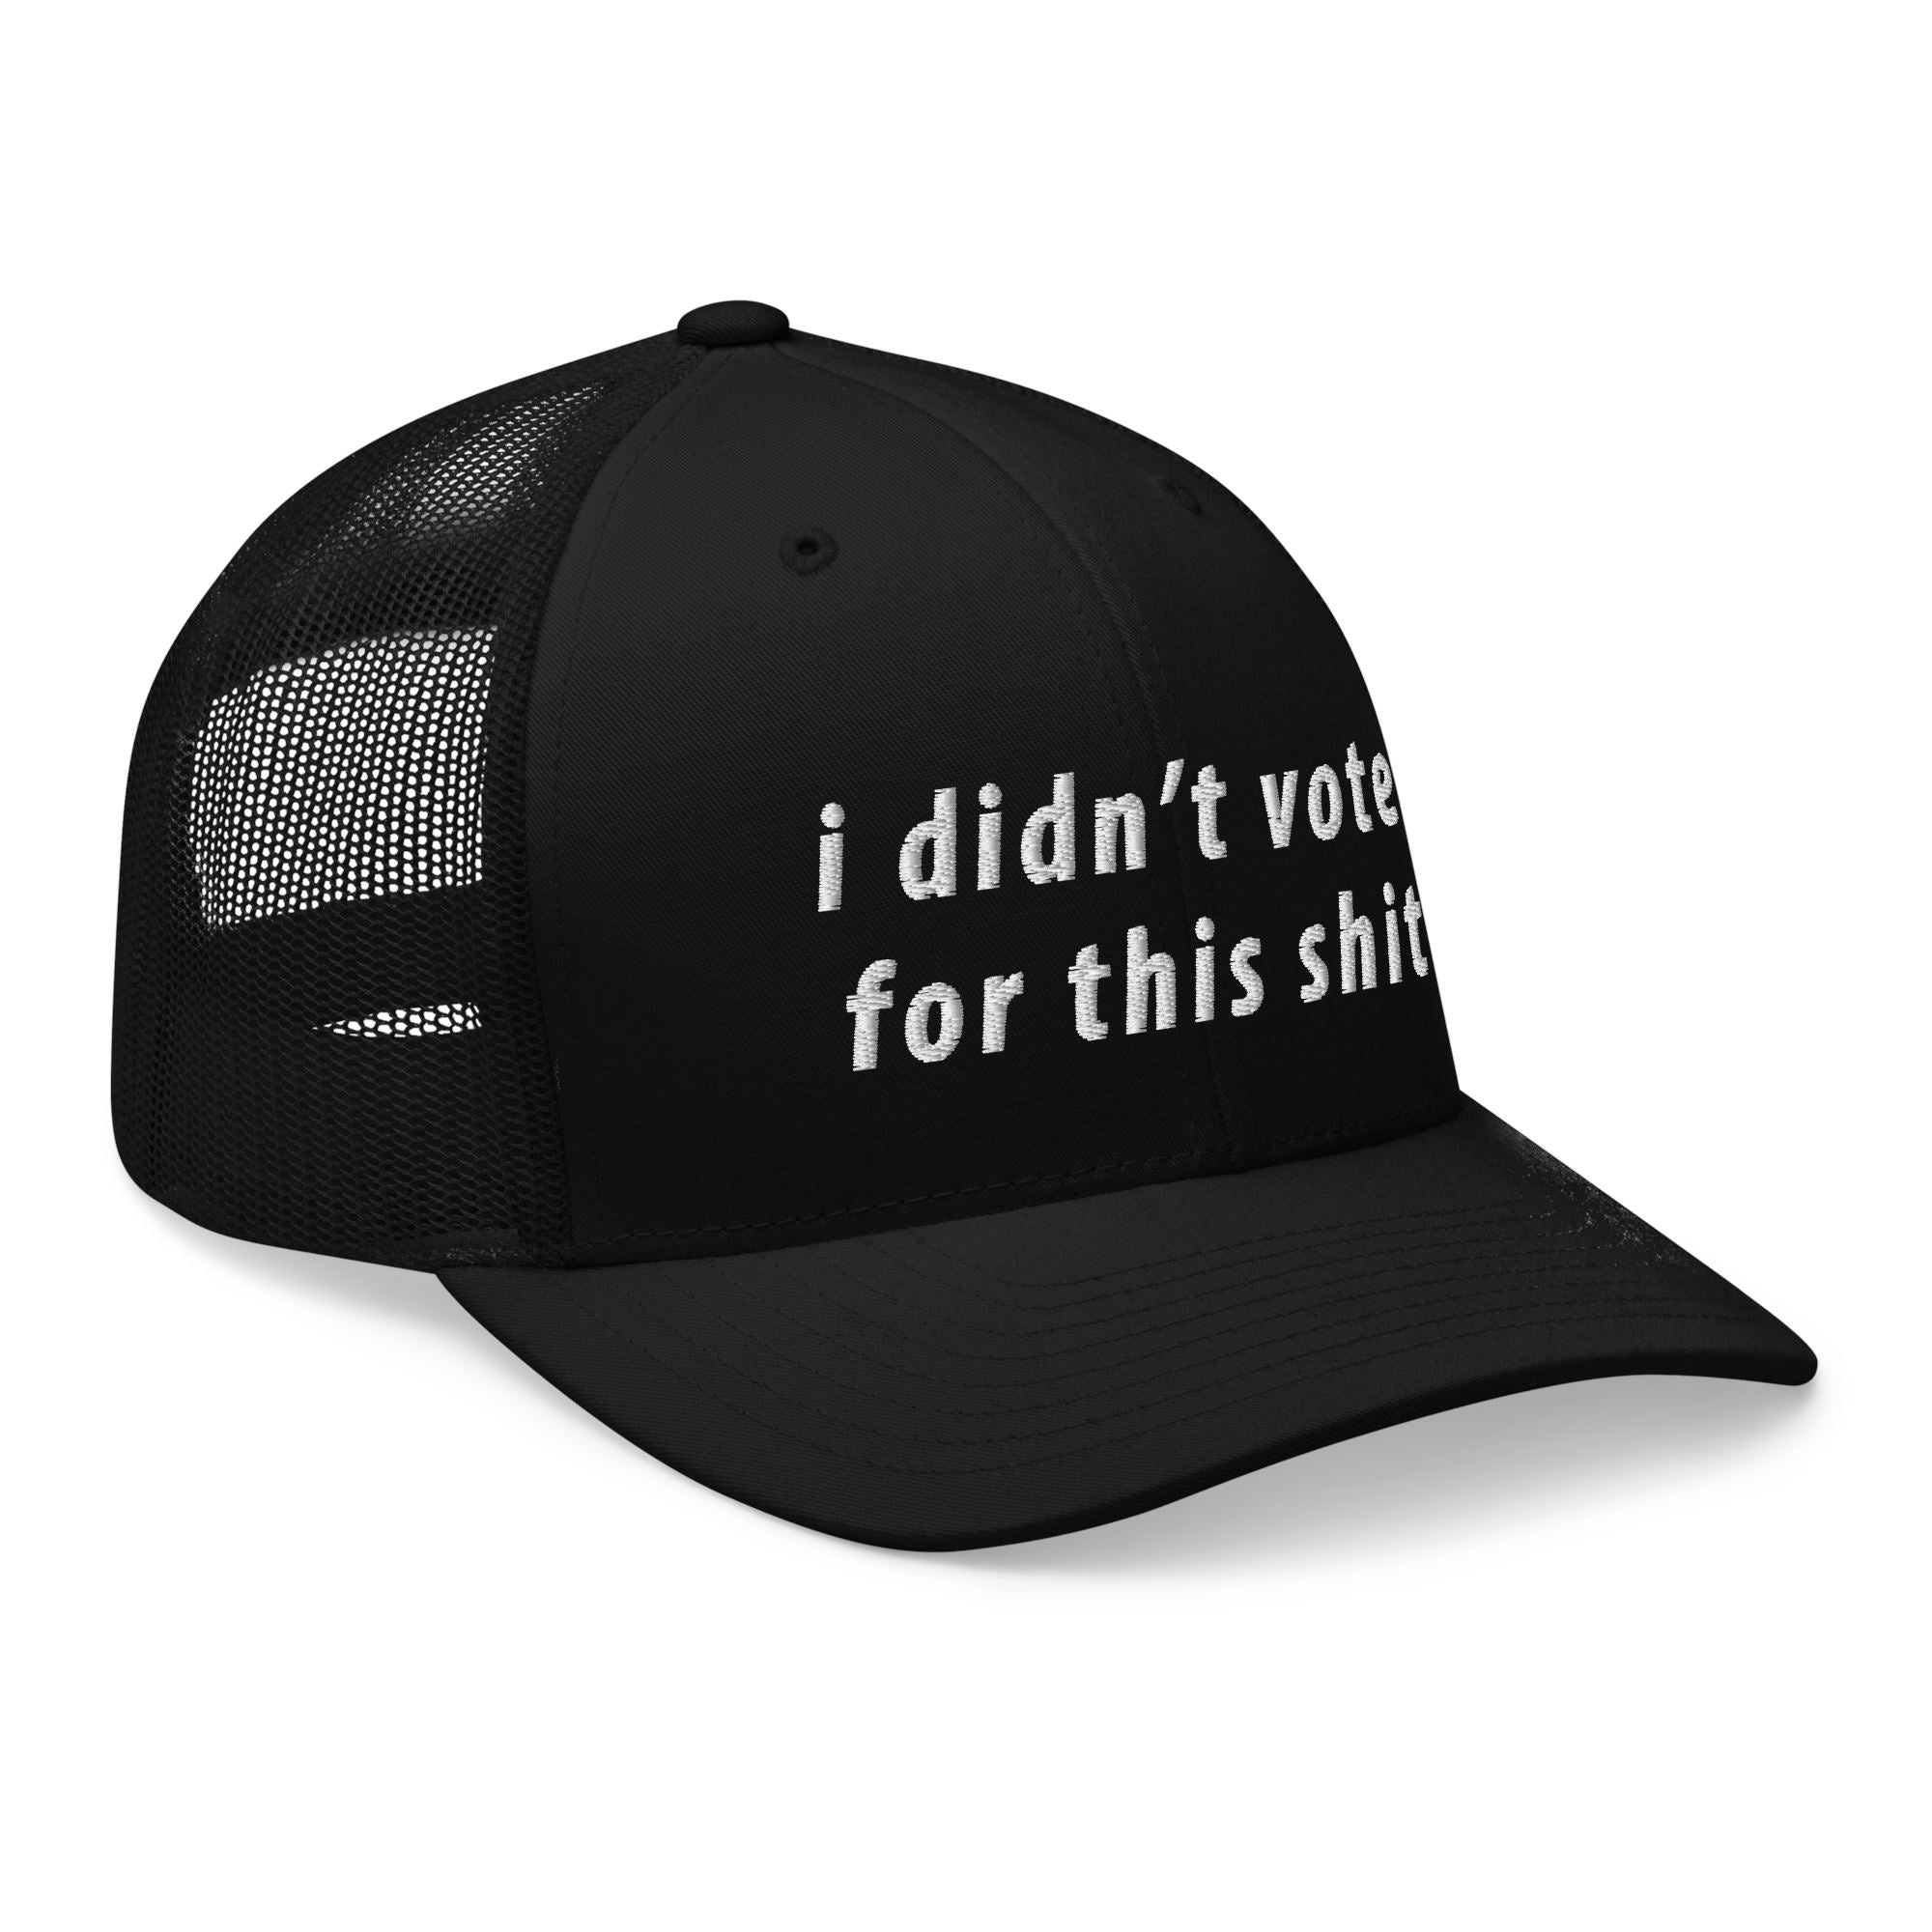 i didn't vote for this shit trucker hat 